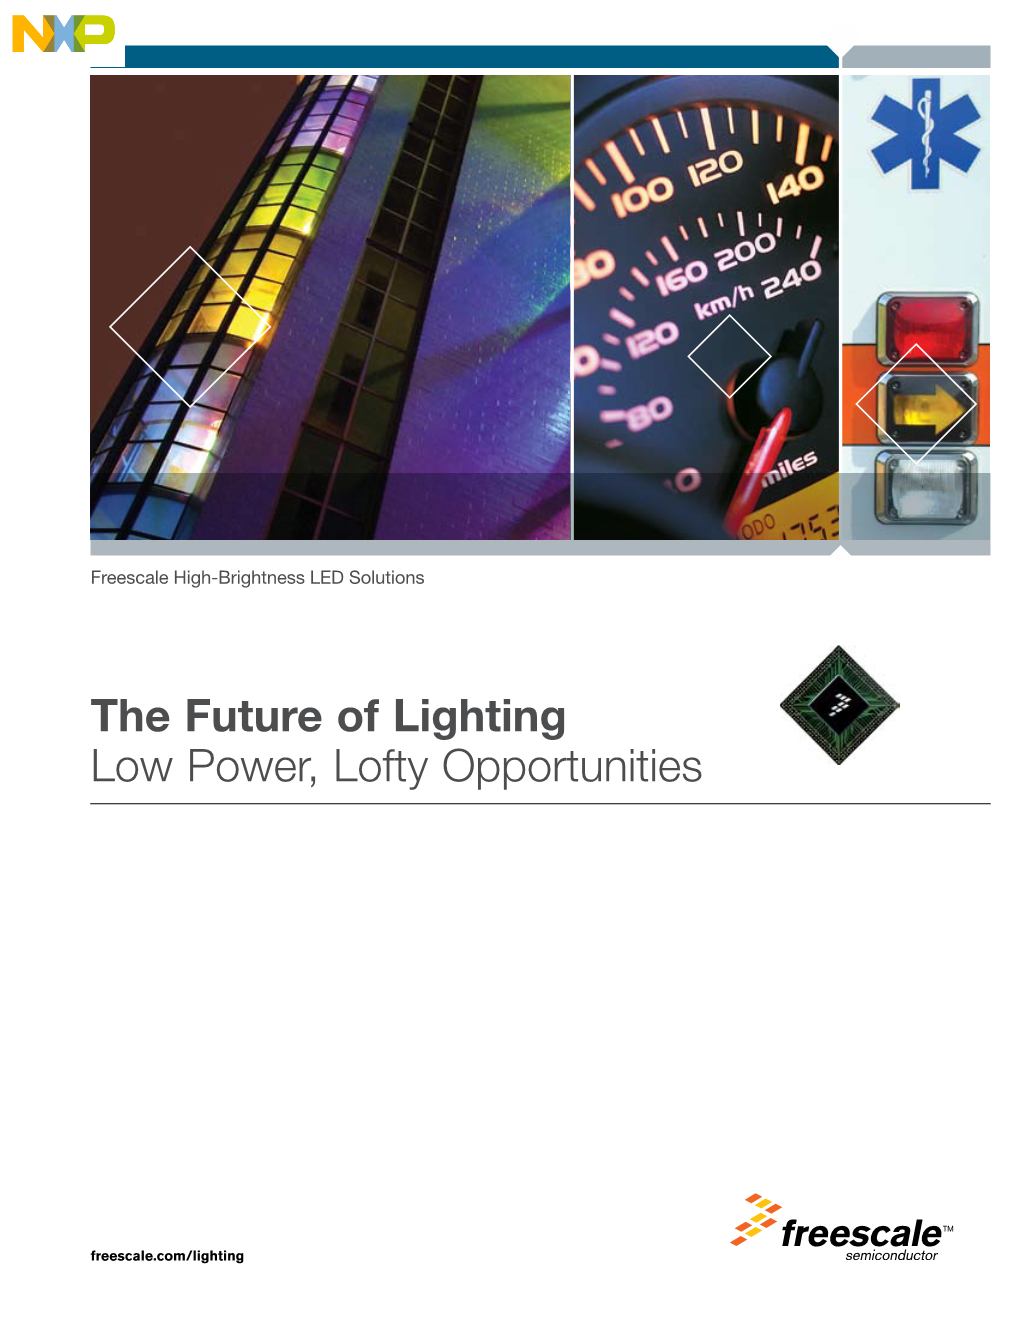 The Future of Lighting Low Power, Lofty Opportunities